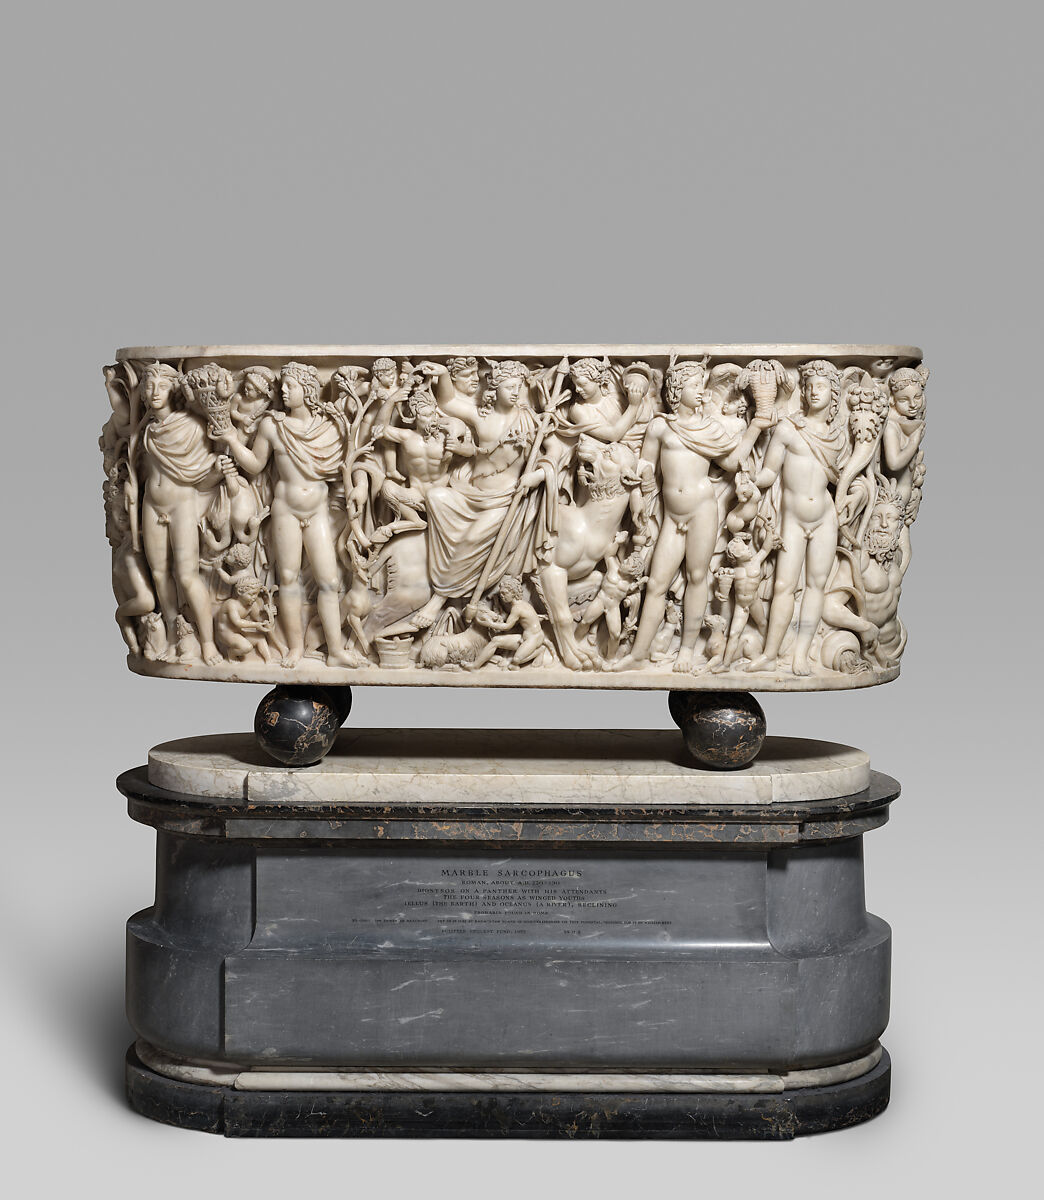 Marble sarcophagus with the Triumph of Dionysos and the Seasons, Marble, Roman 